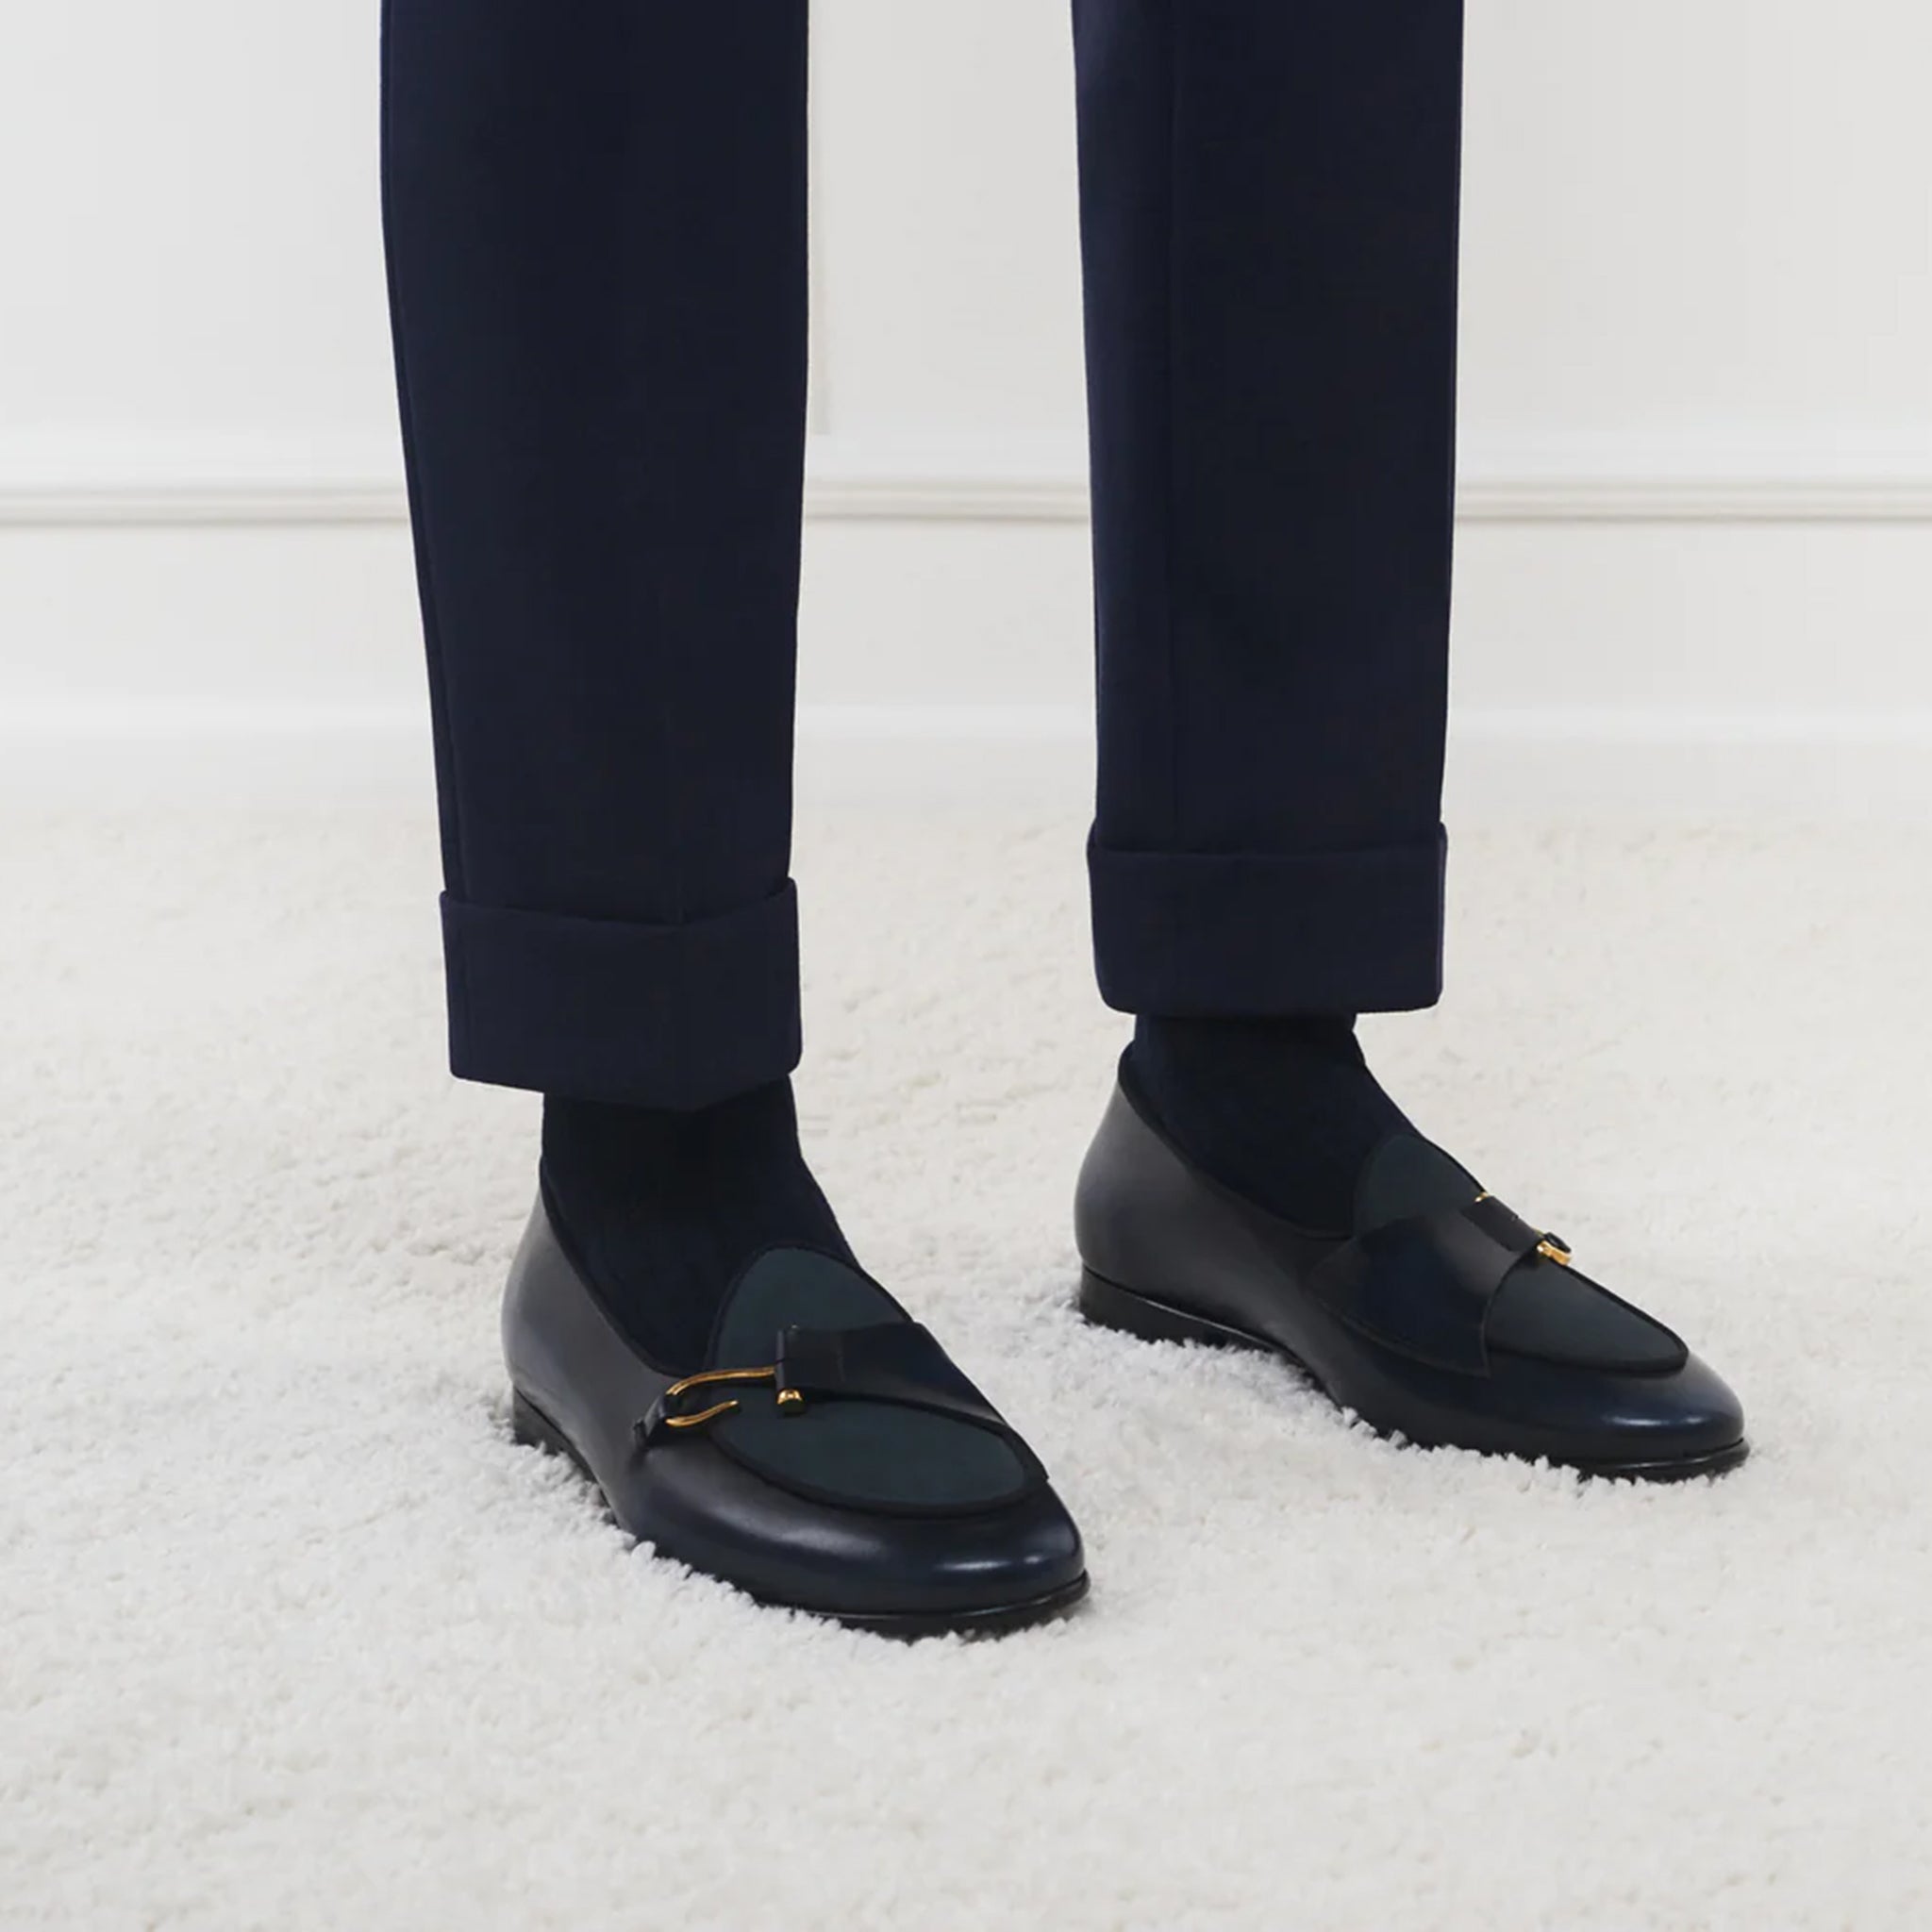 Belgian Loafers with Buckle